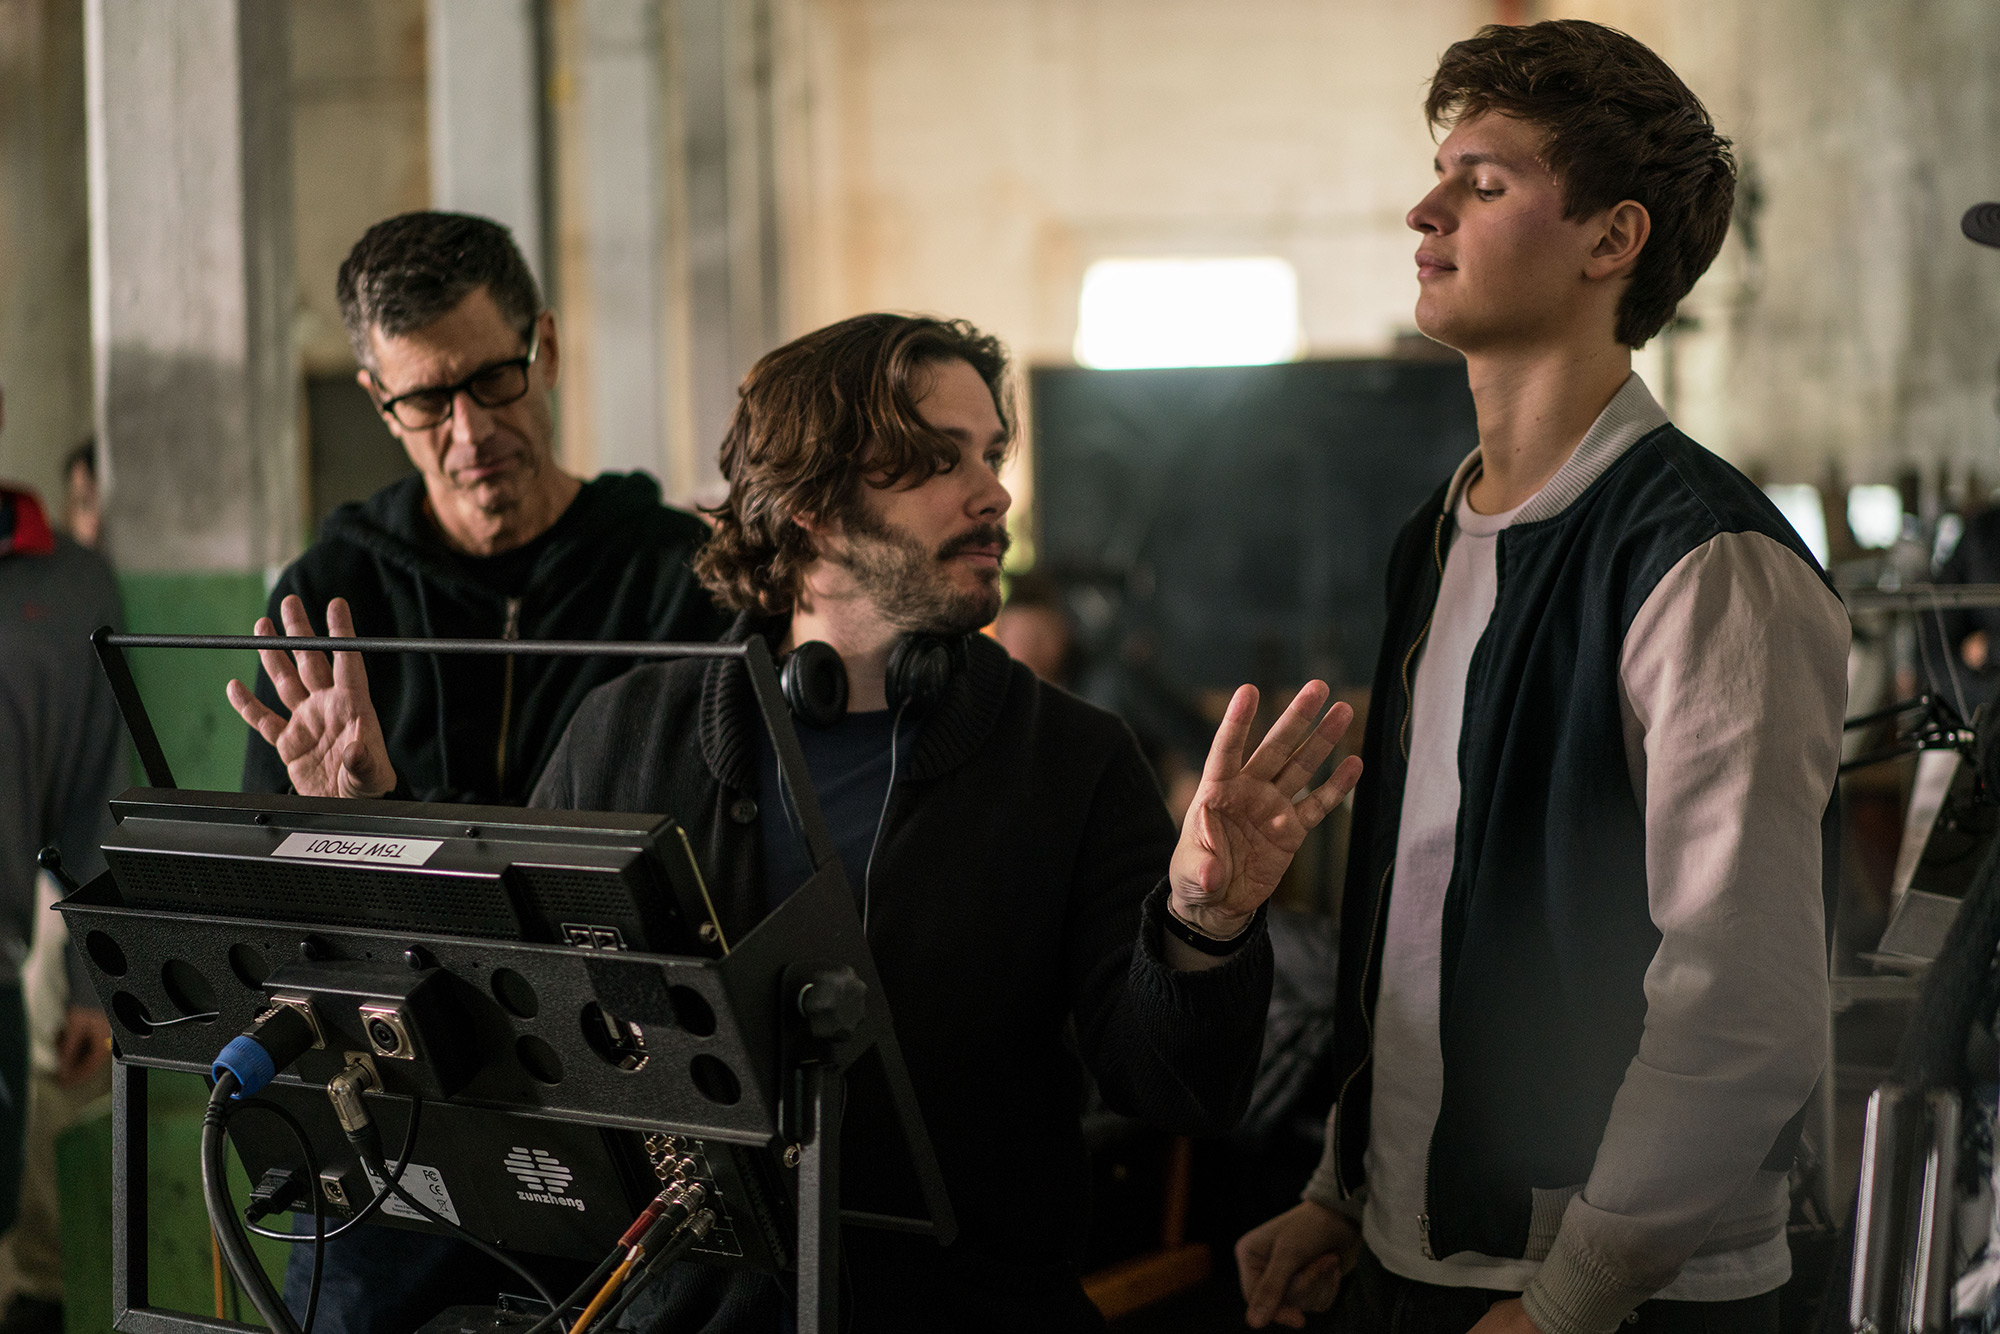 Review: 'Baby Driver' is the summer heist movie you've been